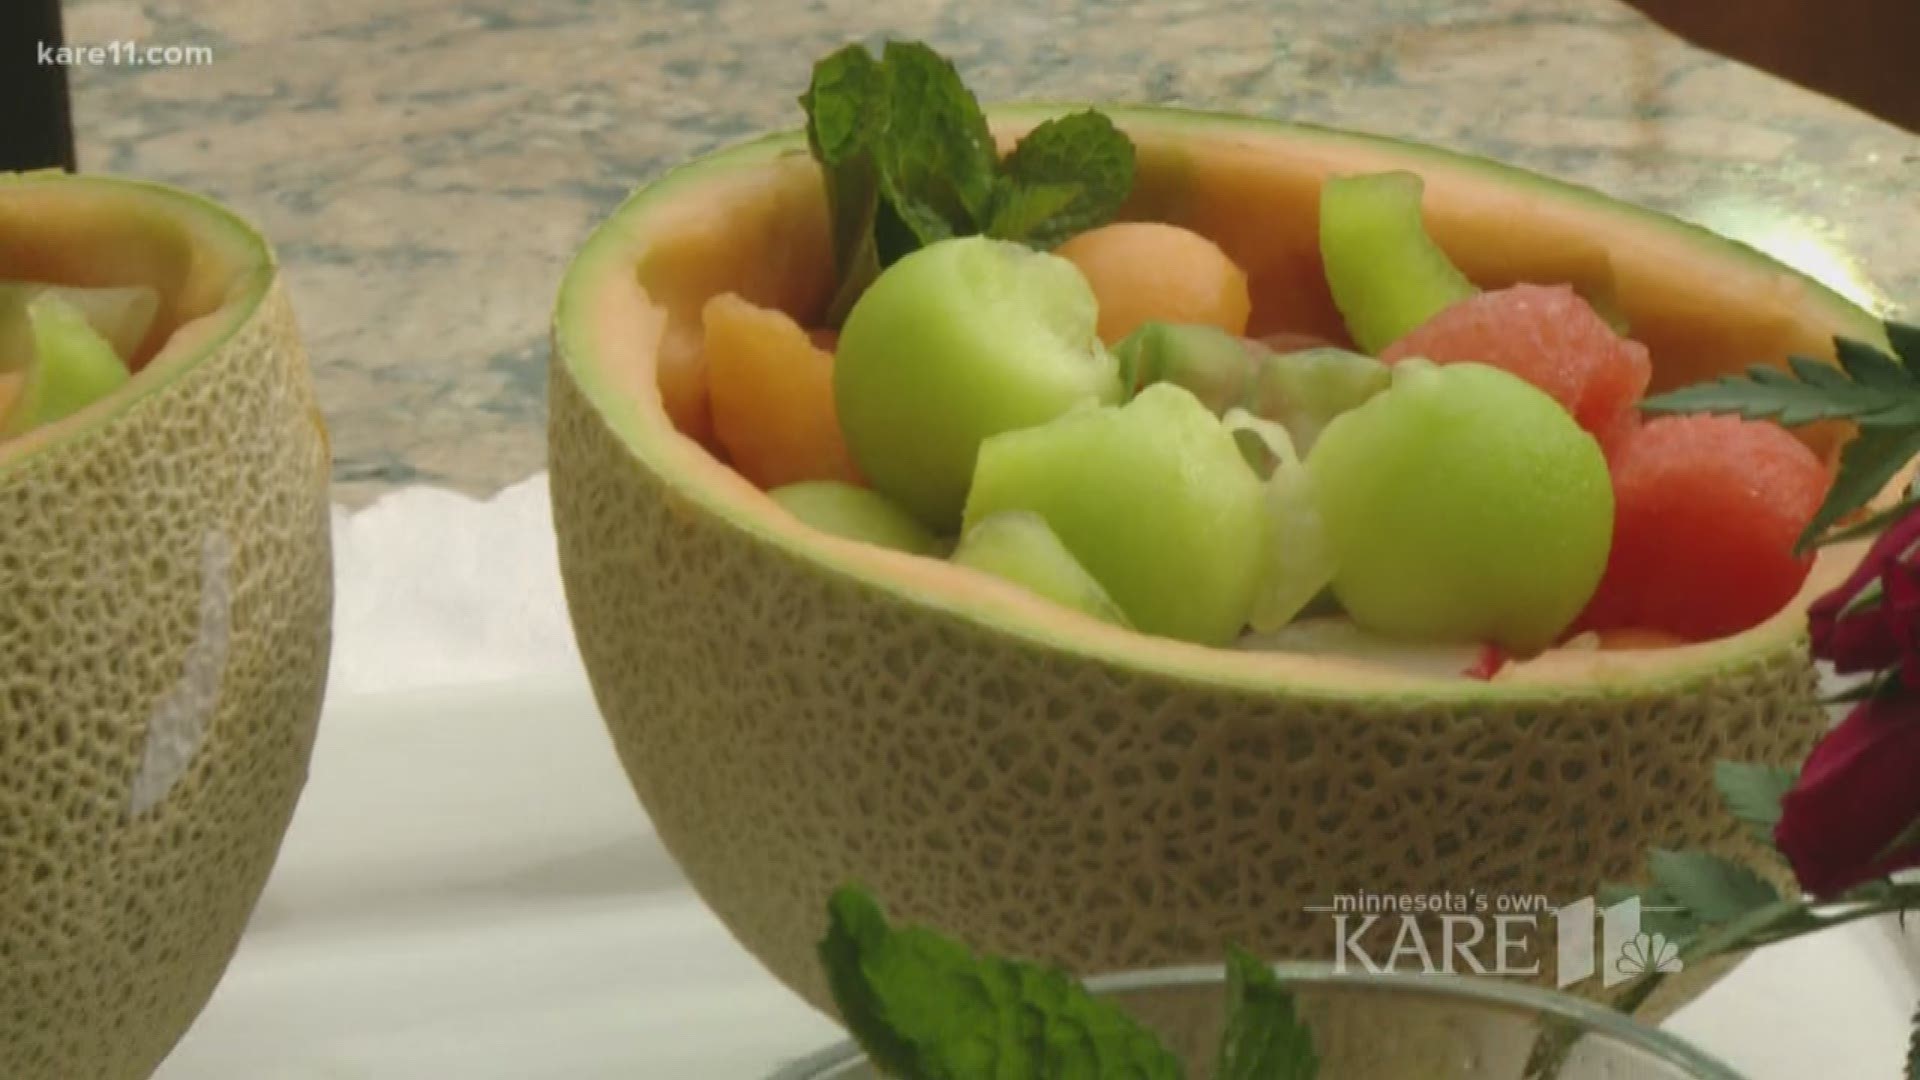 Hyvee is showing you how to pick out your right, ripe melon for your summer cooking, and how to use it to make a fresh fruit salad.